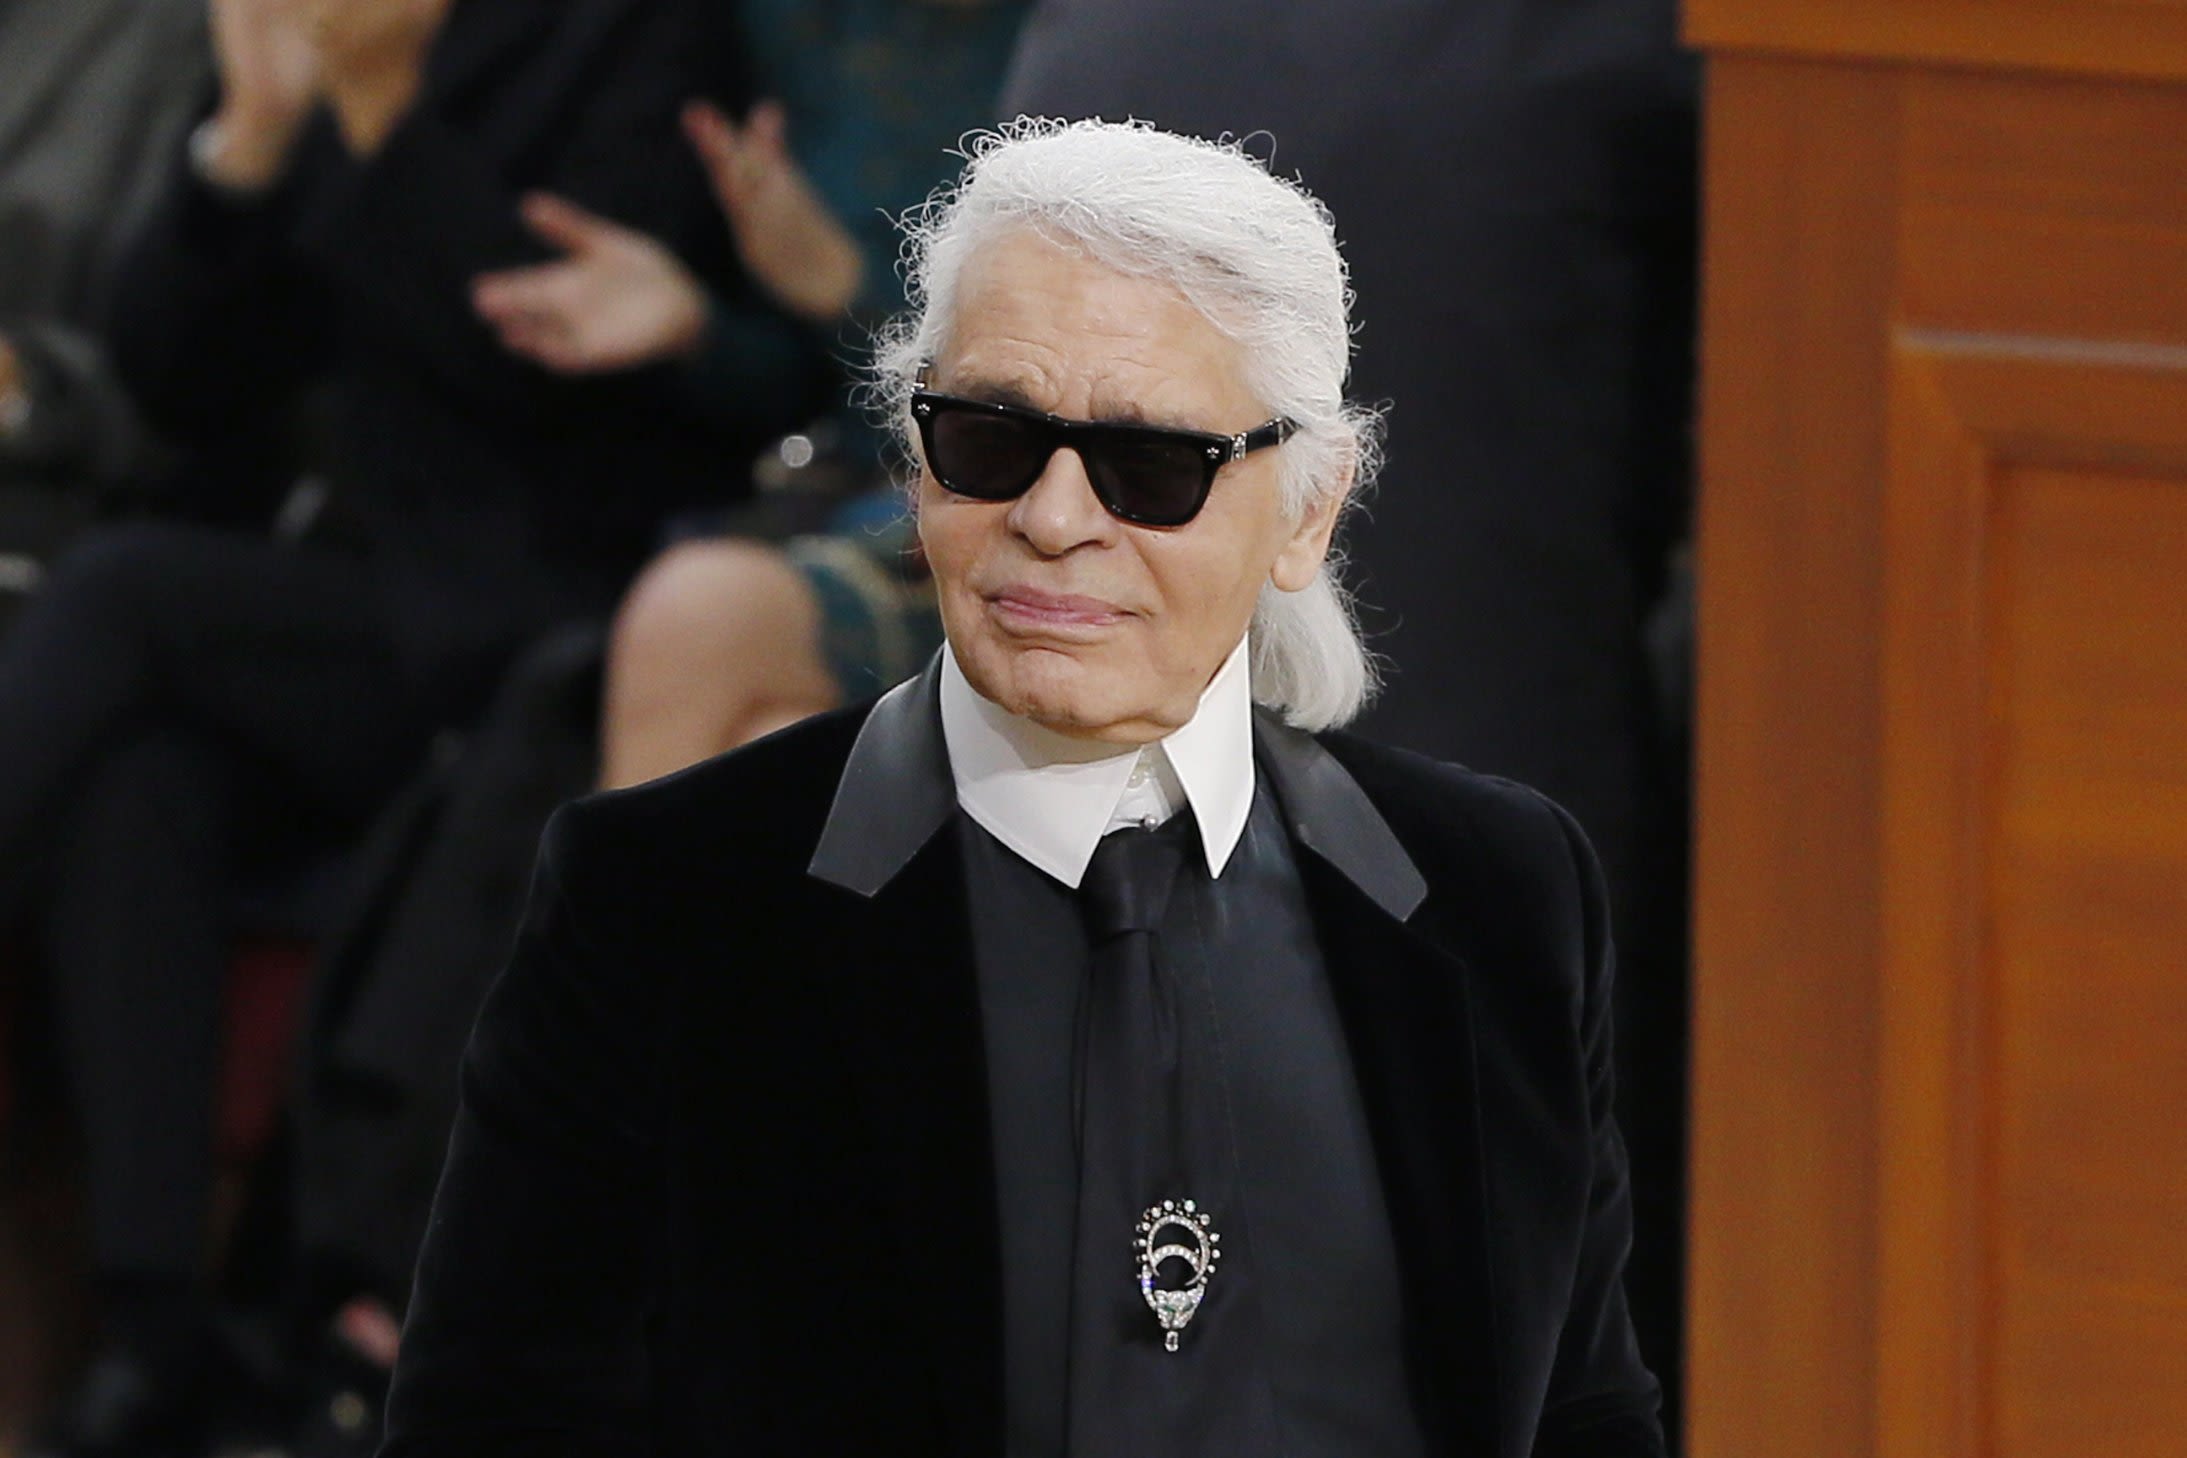 Karl Lagerfeld Legacy: What is Karl Lagerfeld most famous for?